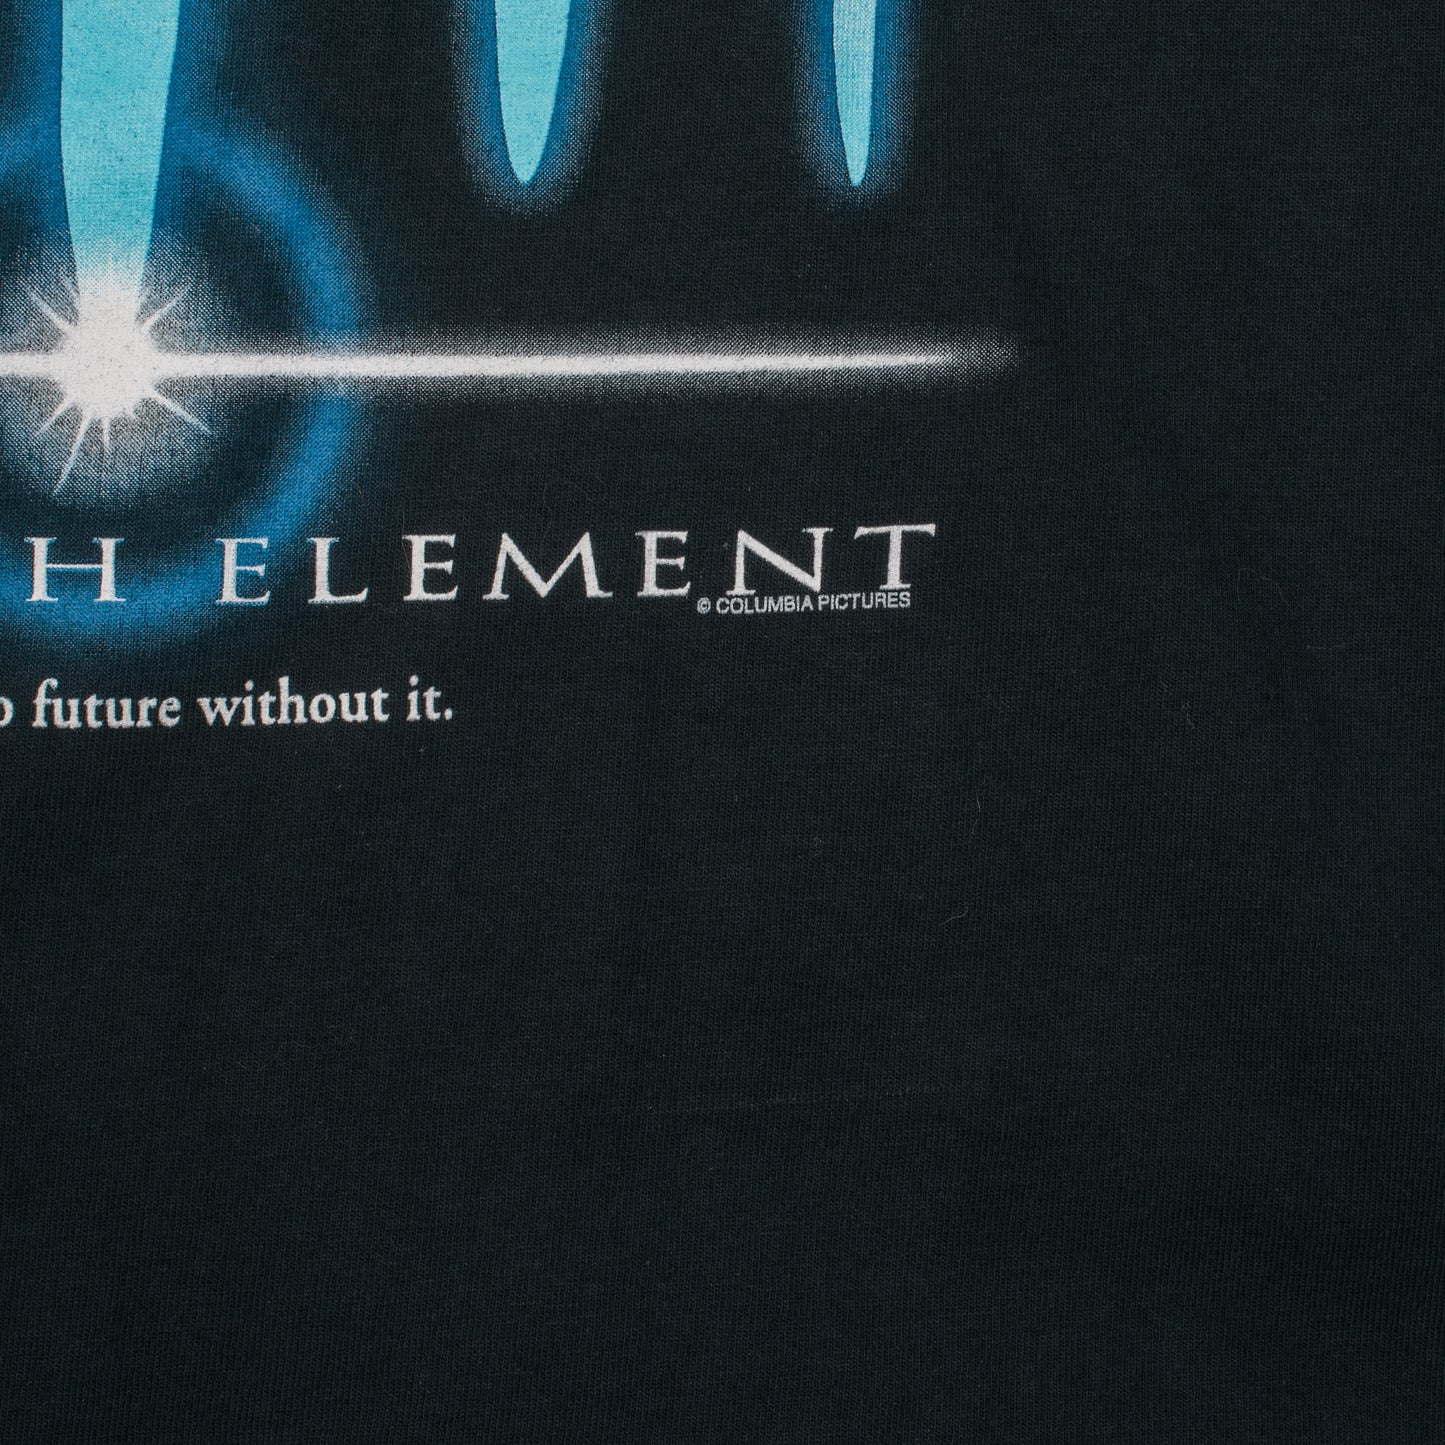 Vintage 90’s The Fifth Element Movie Promo T-Shirt